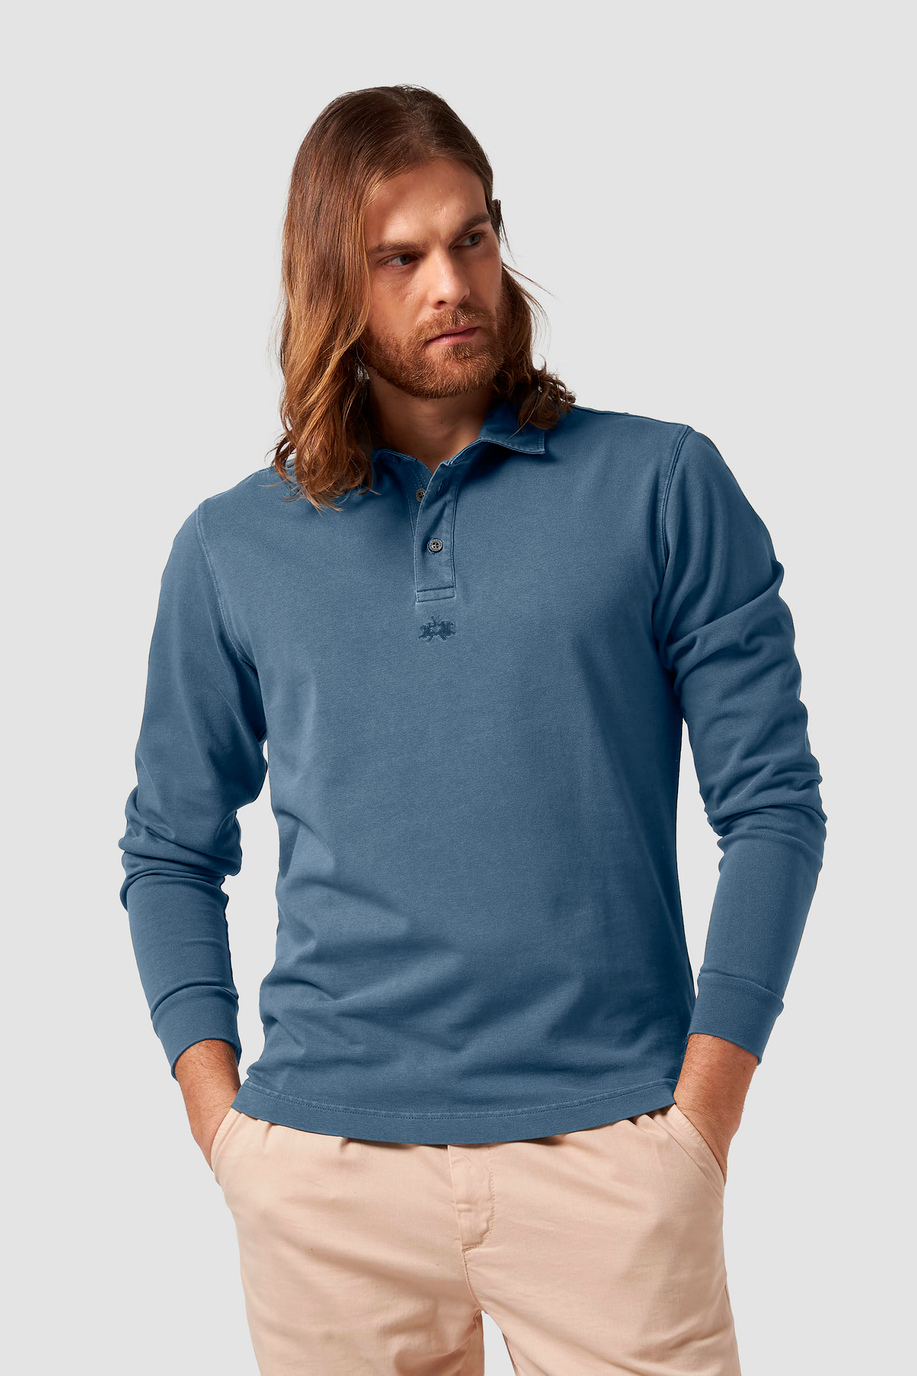 Men's casual and elegant polo t-shirts 